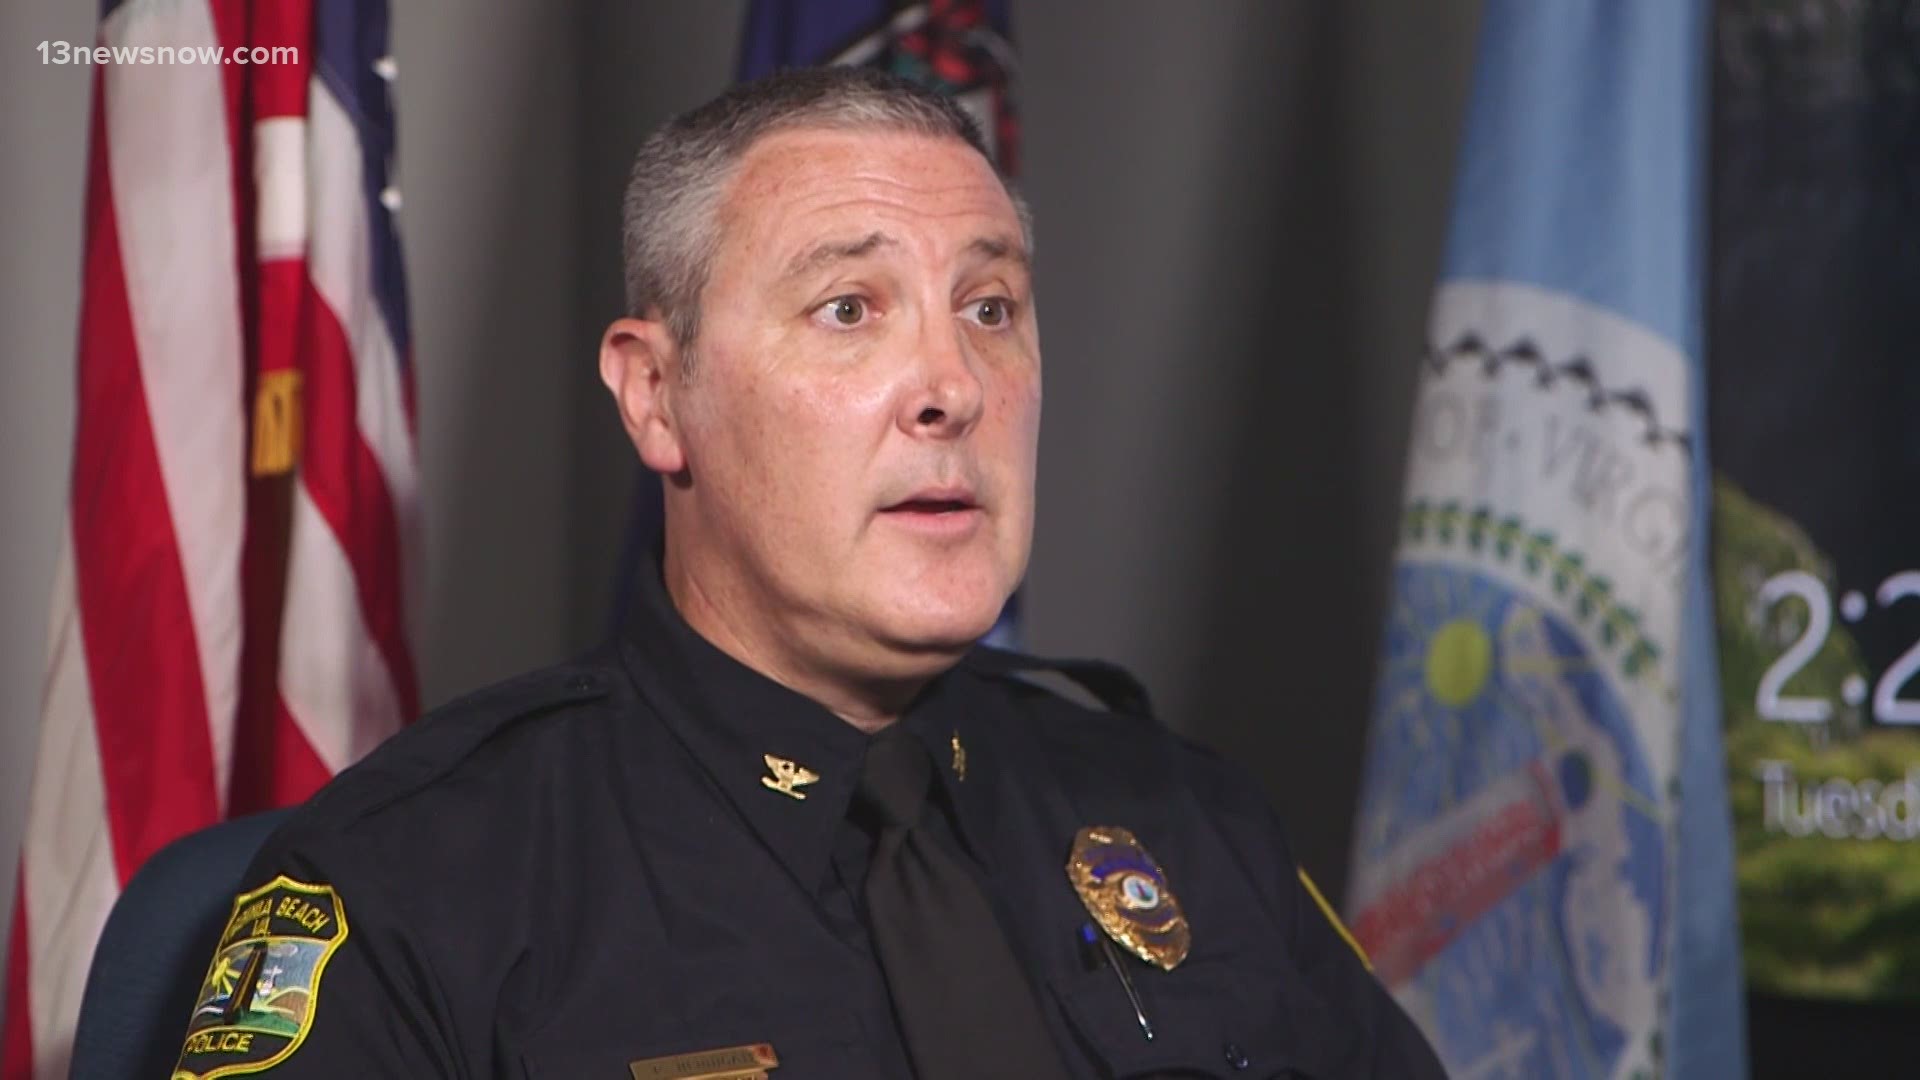 Chief Paul Neudigate is anxious to learn the results of a Virginia State Police investigation into the deadly police shooting of Donovon Lynch.